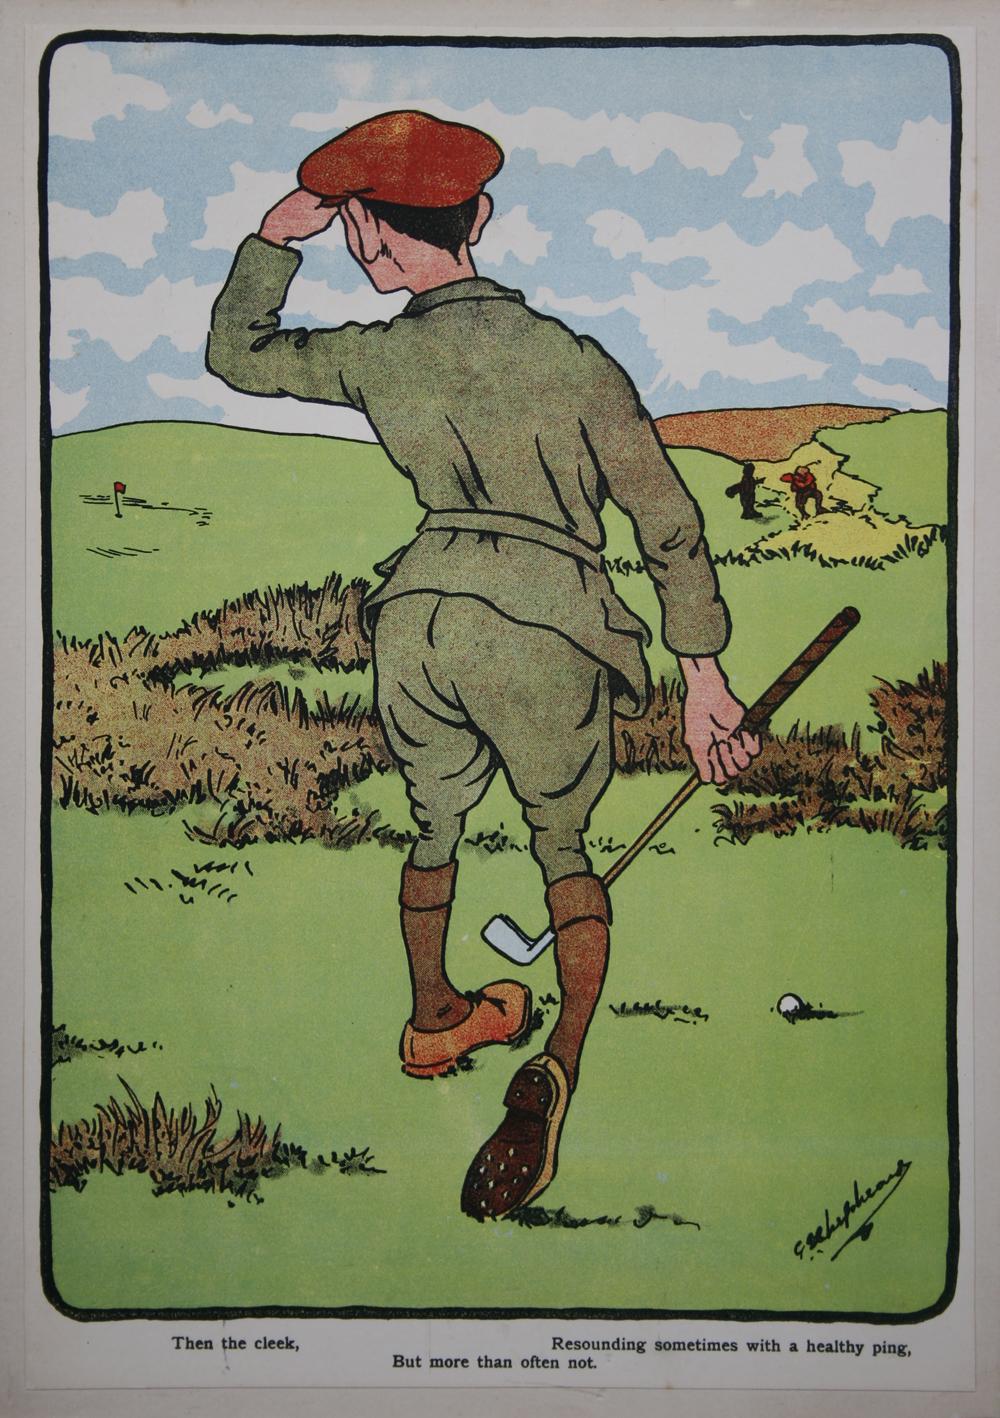 Humorous Golfing prints.
A wonderful set of 12 Humorous Golfing Incidents after G. E. Shepherd. This is a very rare set of amusing golf scenes by the early 20th century illustrator of whom little is known. Each chromolithographic print is mounted